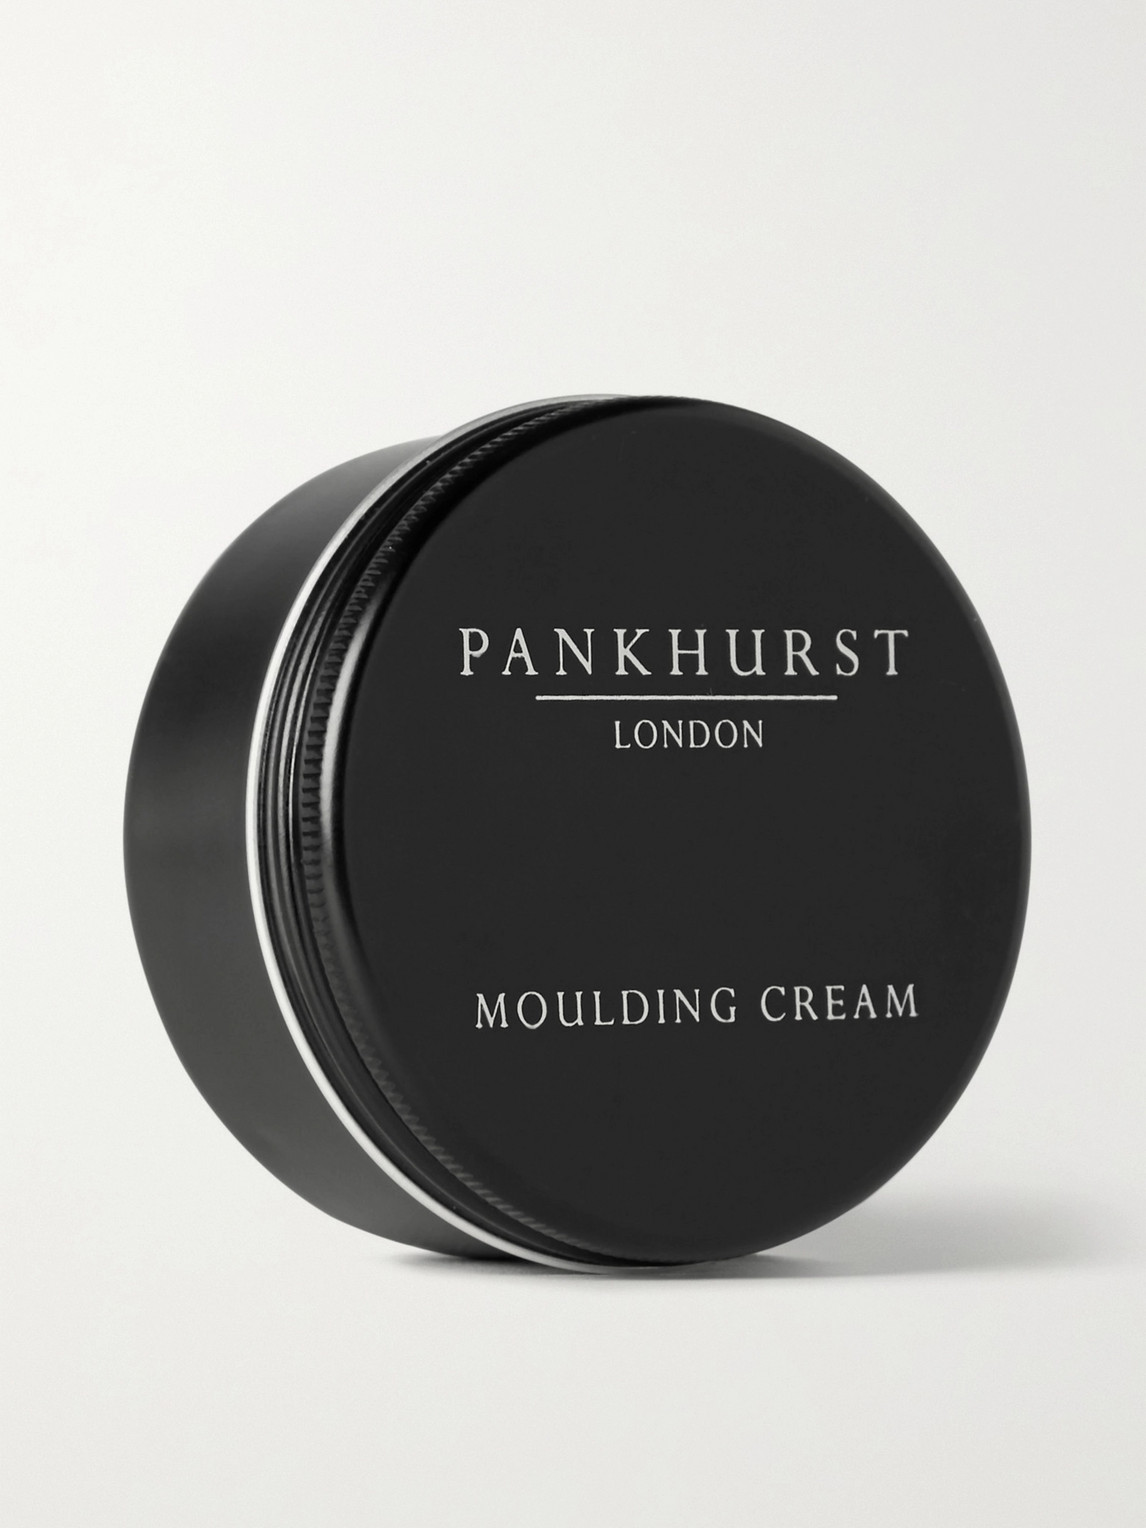 Pankhurst London Moulding Cream, 75ml In Colorless